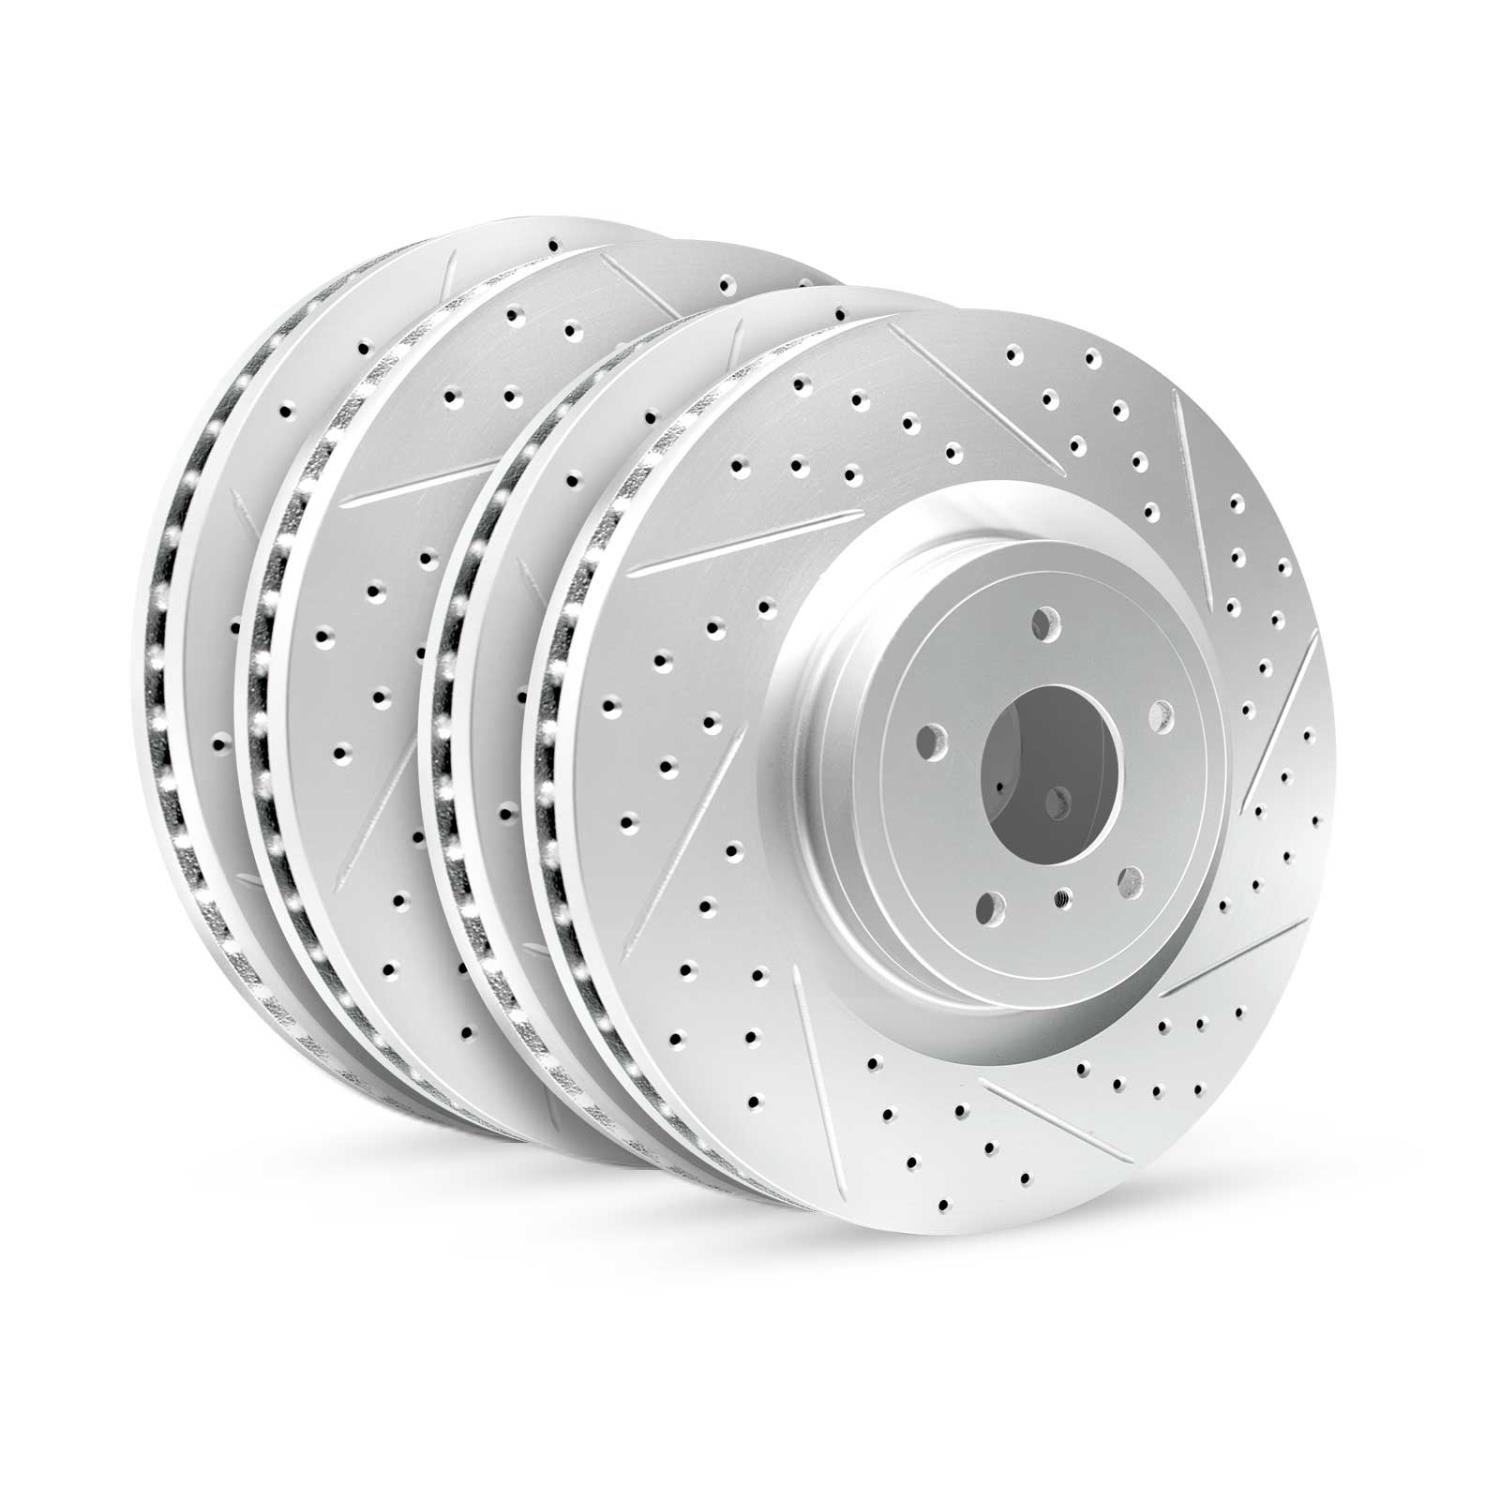 GEO-Carbon Drilled/Slotted Rotors, 2004-2010 BMW, Position: